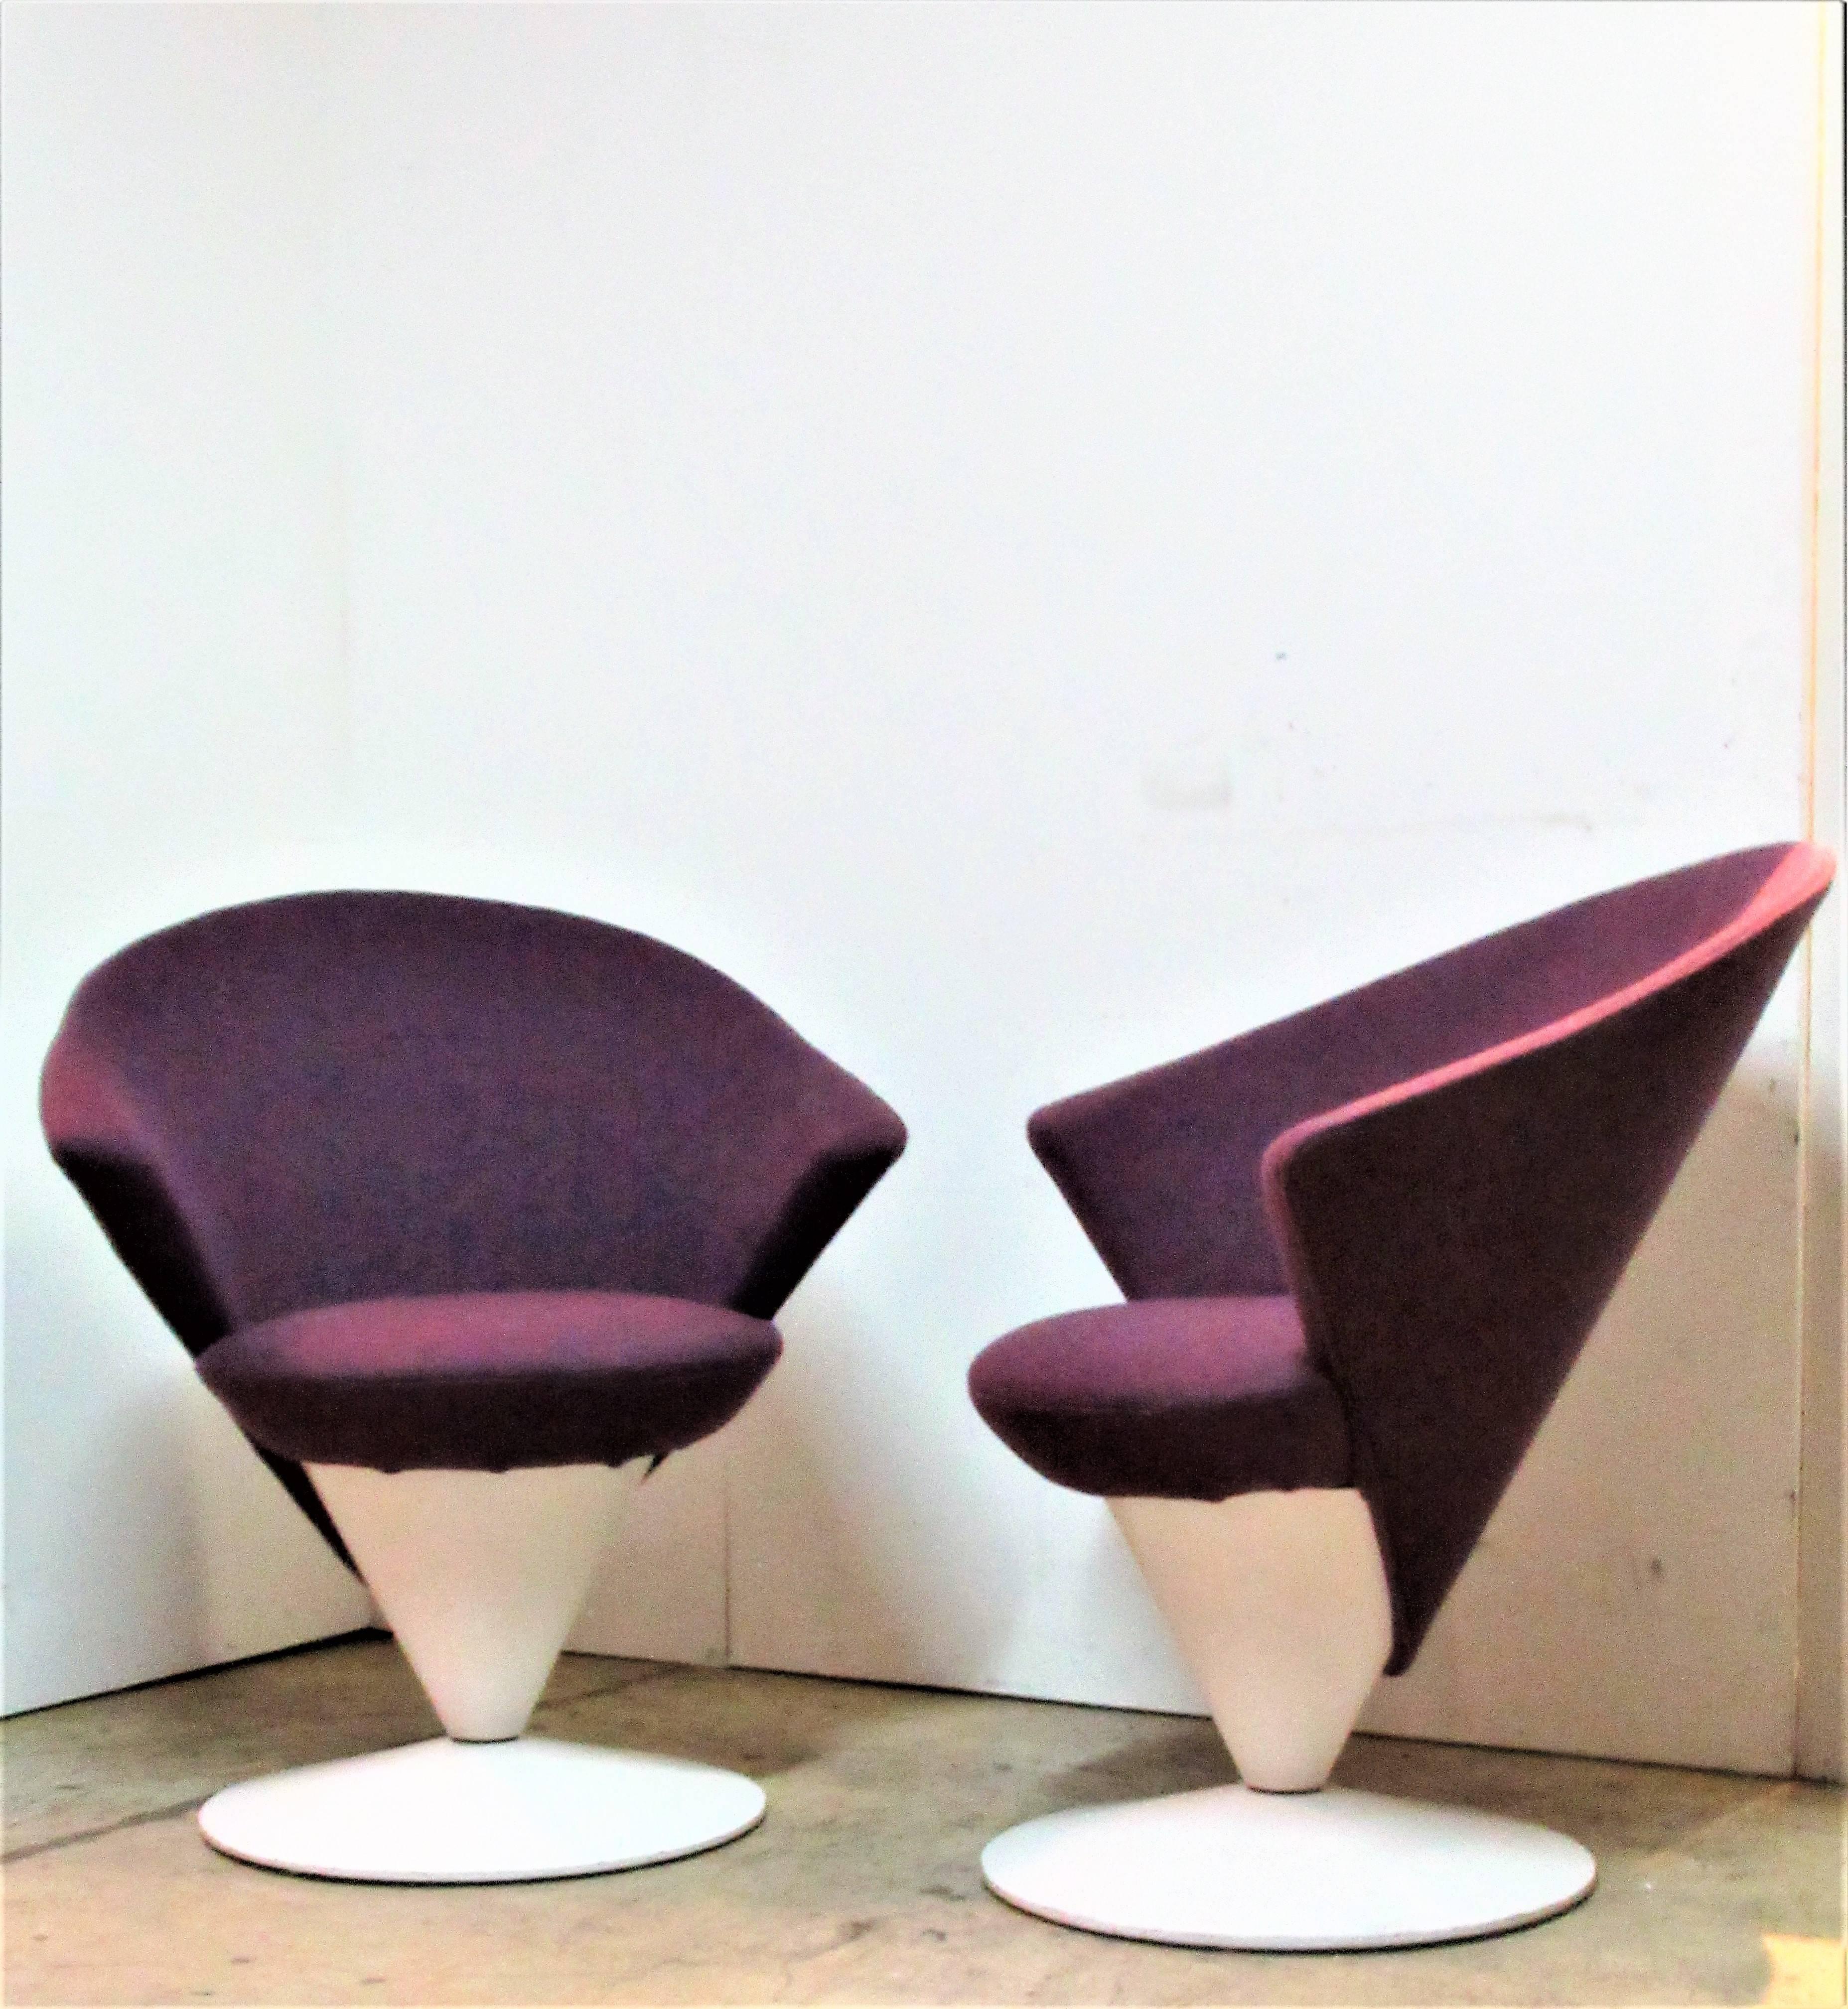 Pair of swivel cone chairs by Adrian Pearsall for Craft Associates, circa 1960s. These were reupholstered some time ago in a beautiful Knoll style quality woven purple fabric that works perfectly with the futuristic design of these chairs.